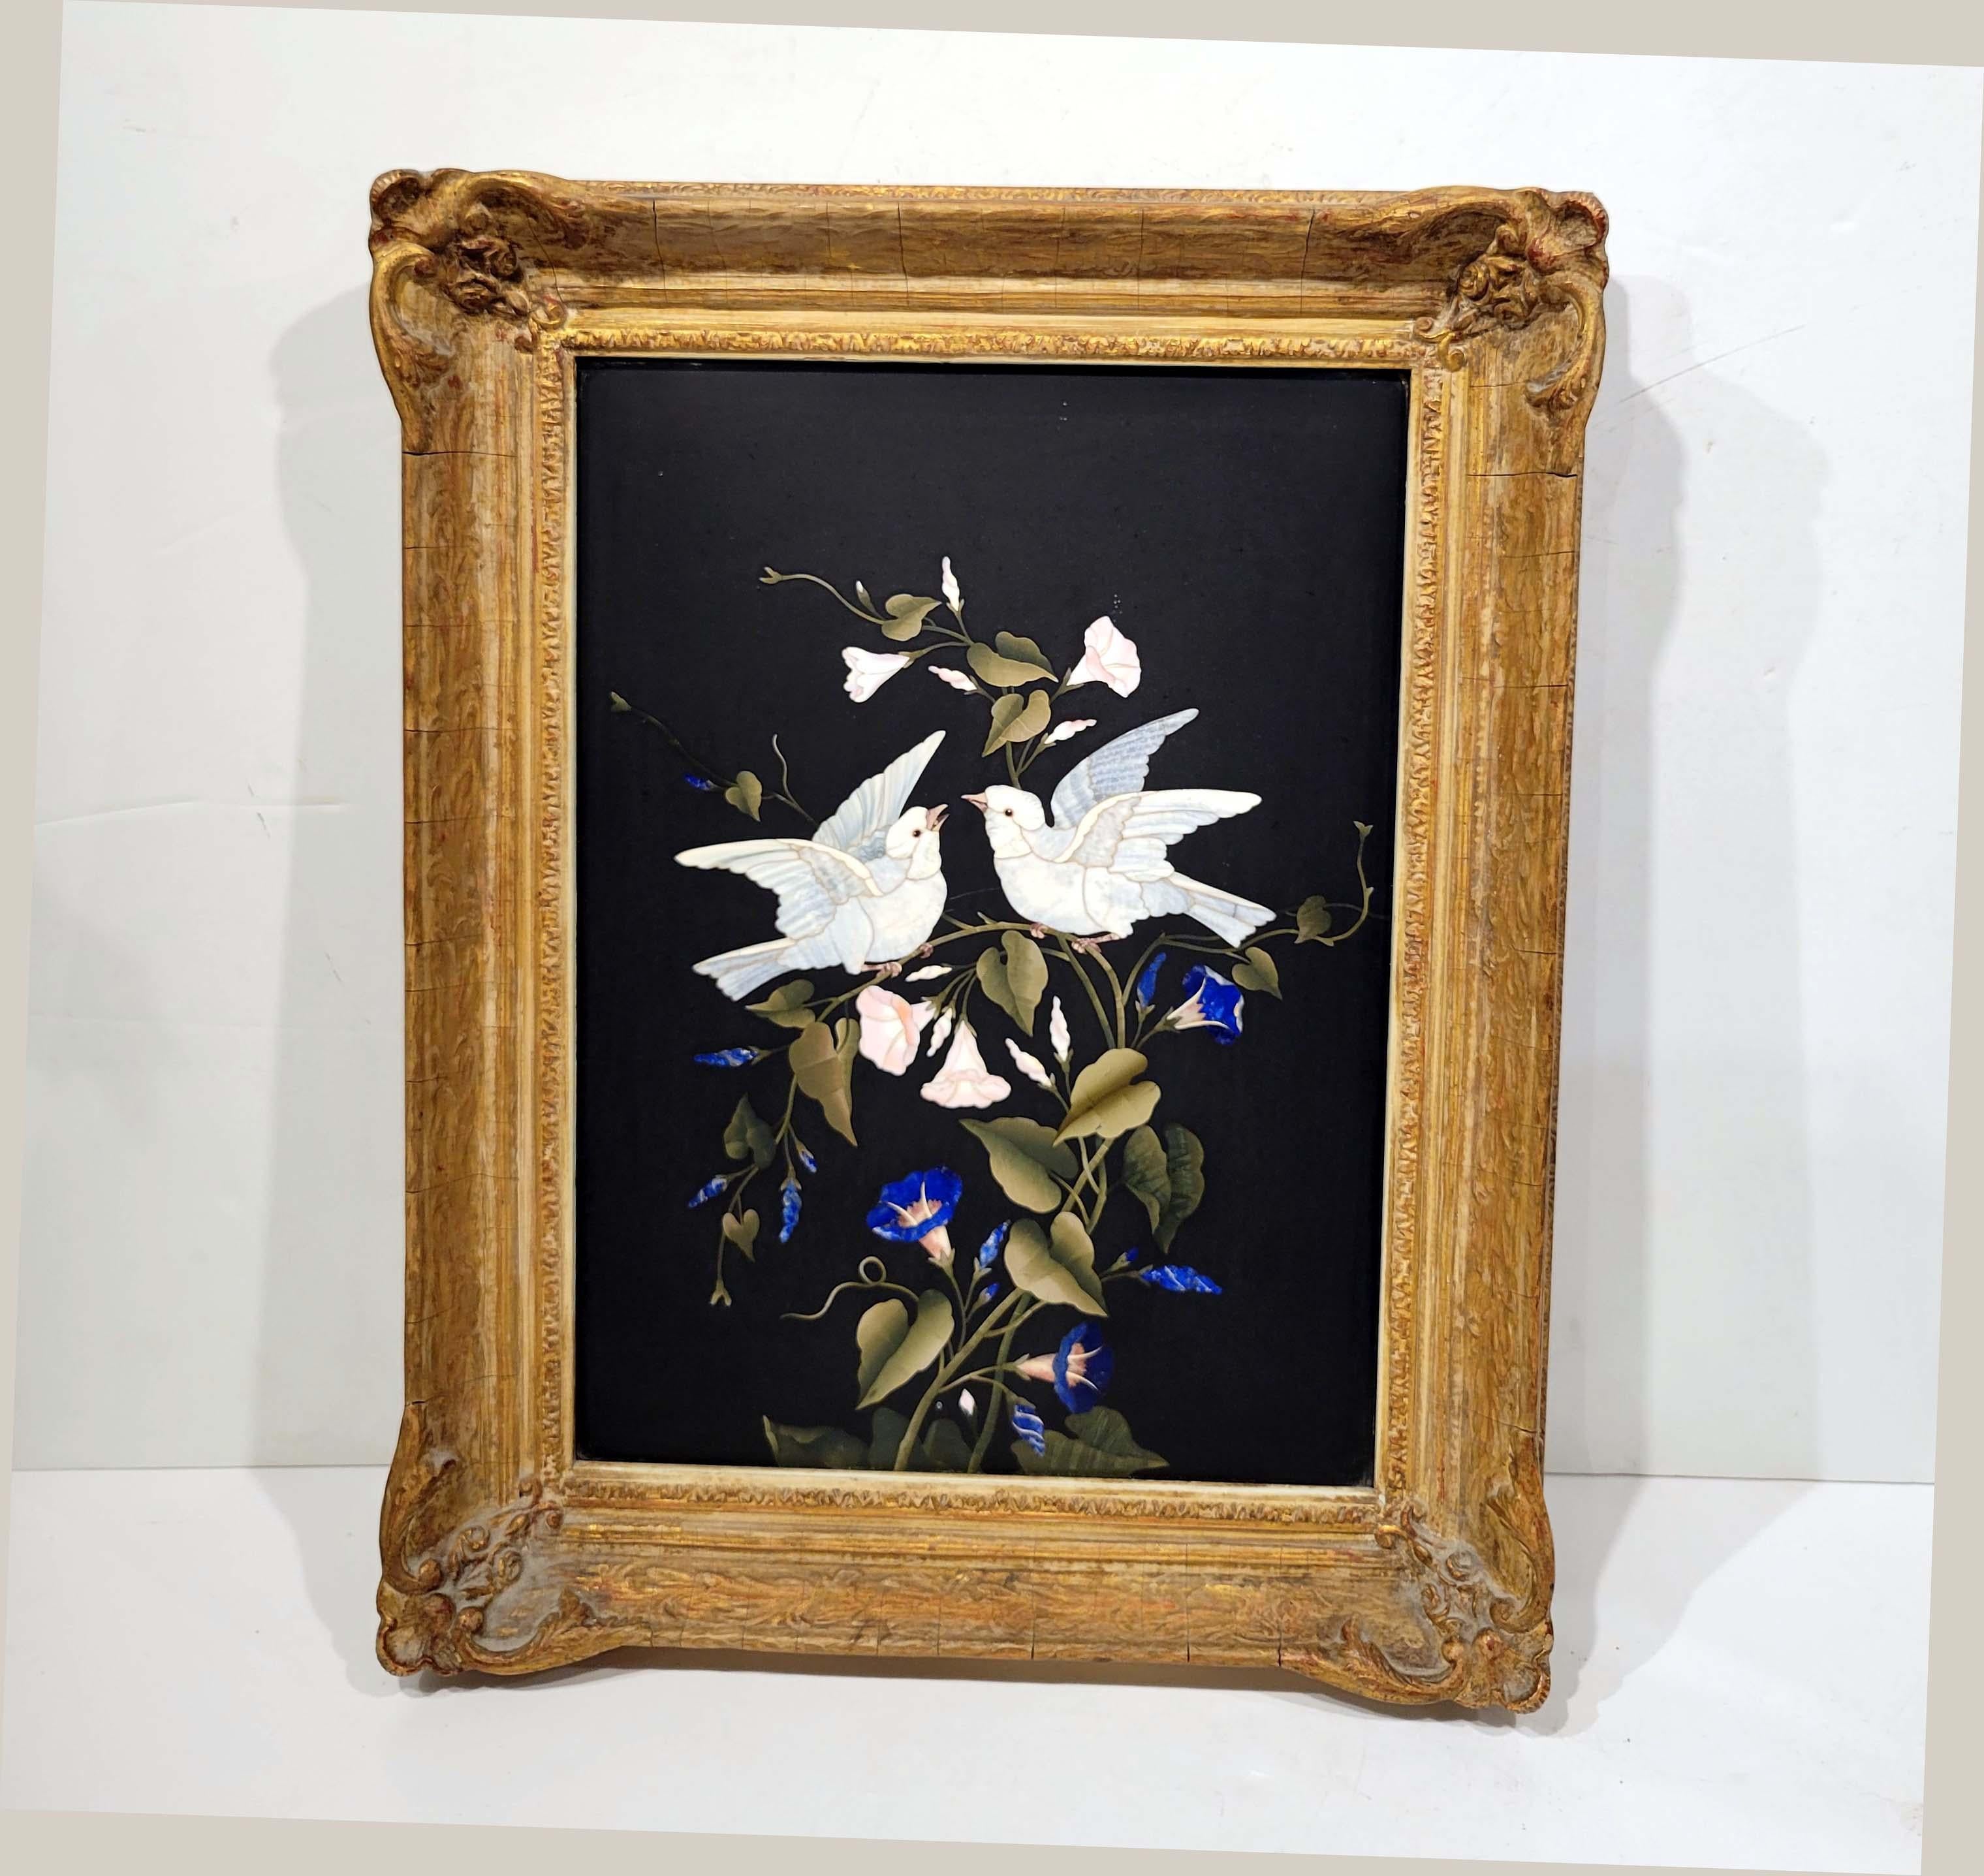 Beautifully executed inlaid marble with different specimens on black marble background. Italian Circa 2nd half of 19th century . Mounted in an antique carved frame. Nice weight to it and in great condition. Frame measures 19 x 15 inches, Plaque